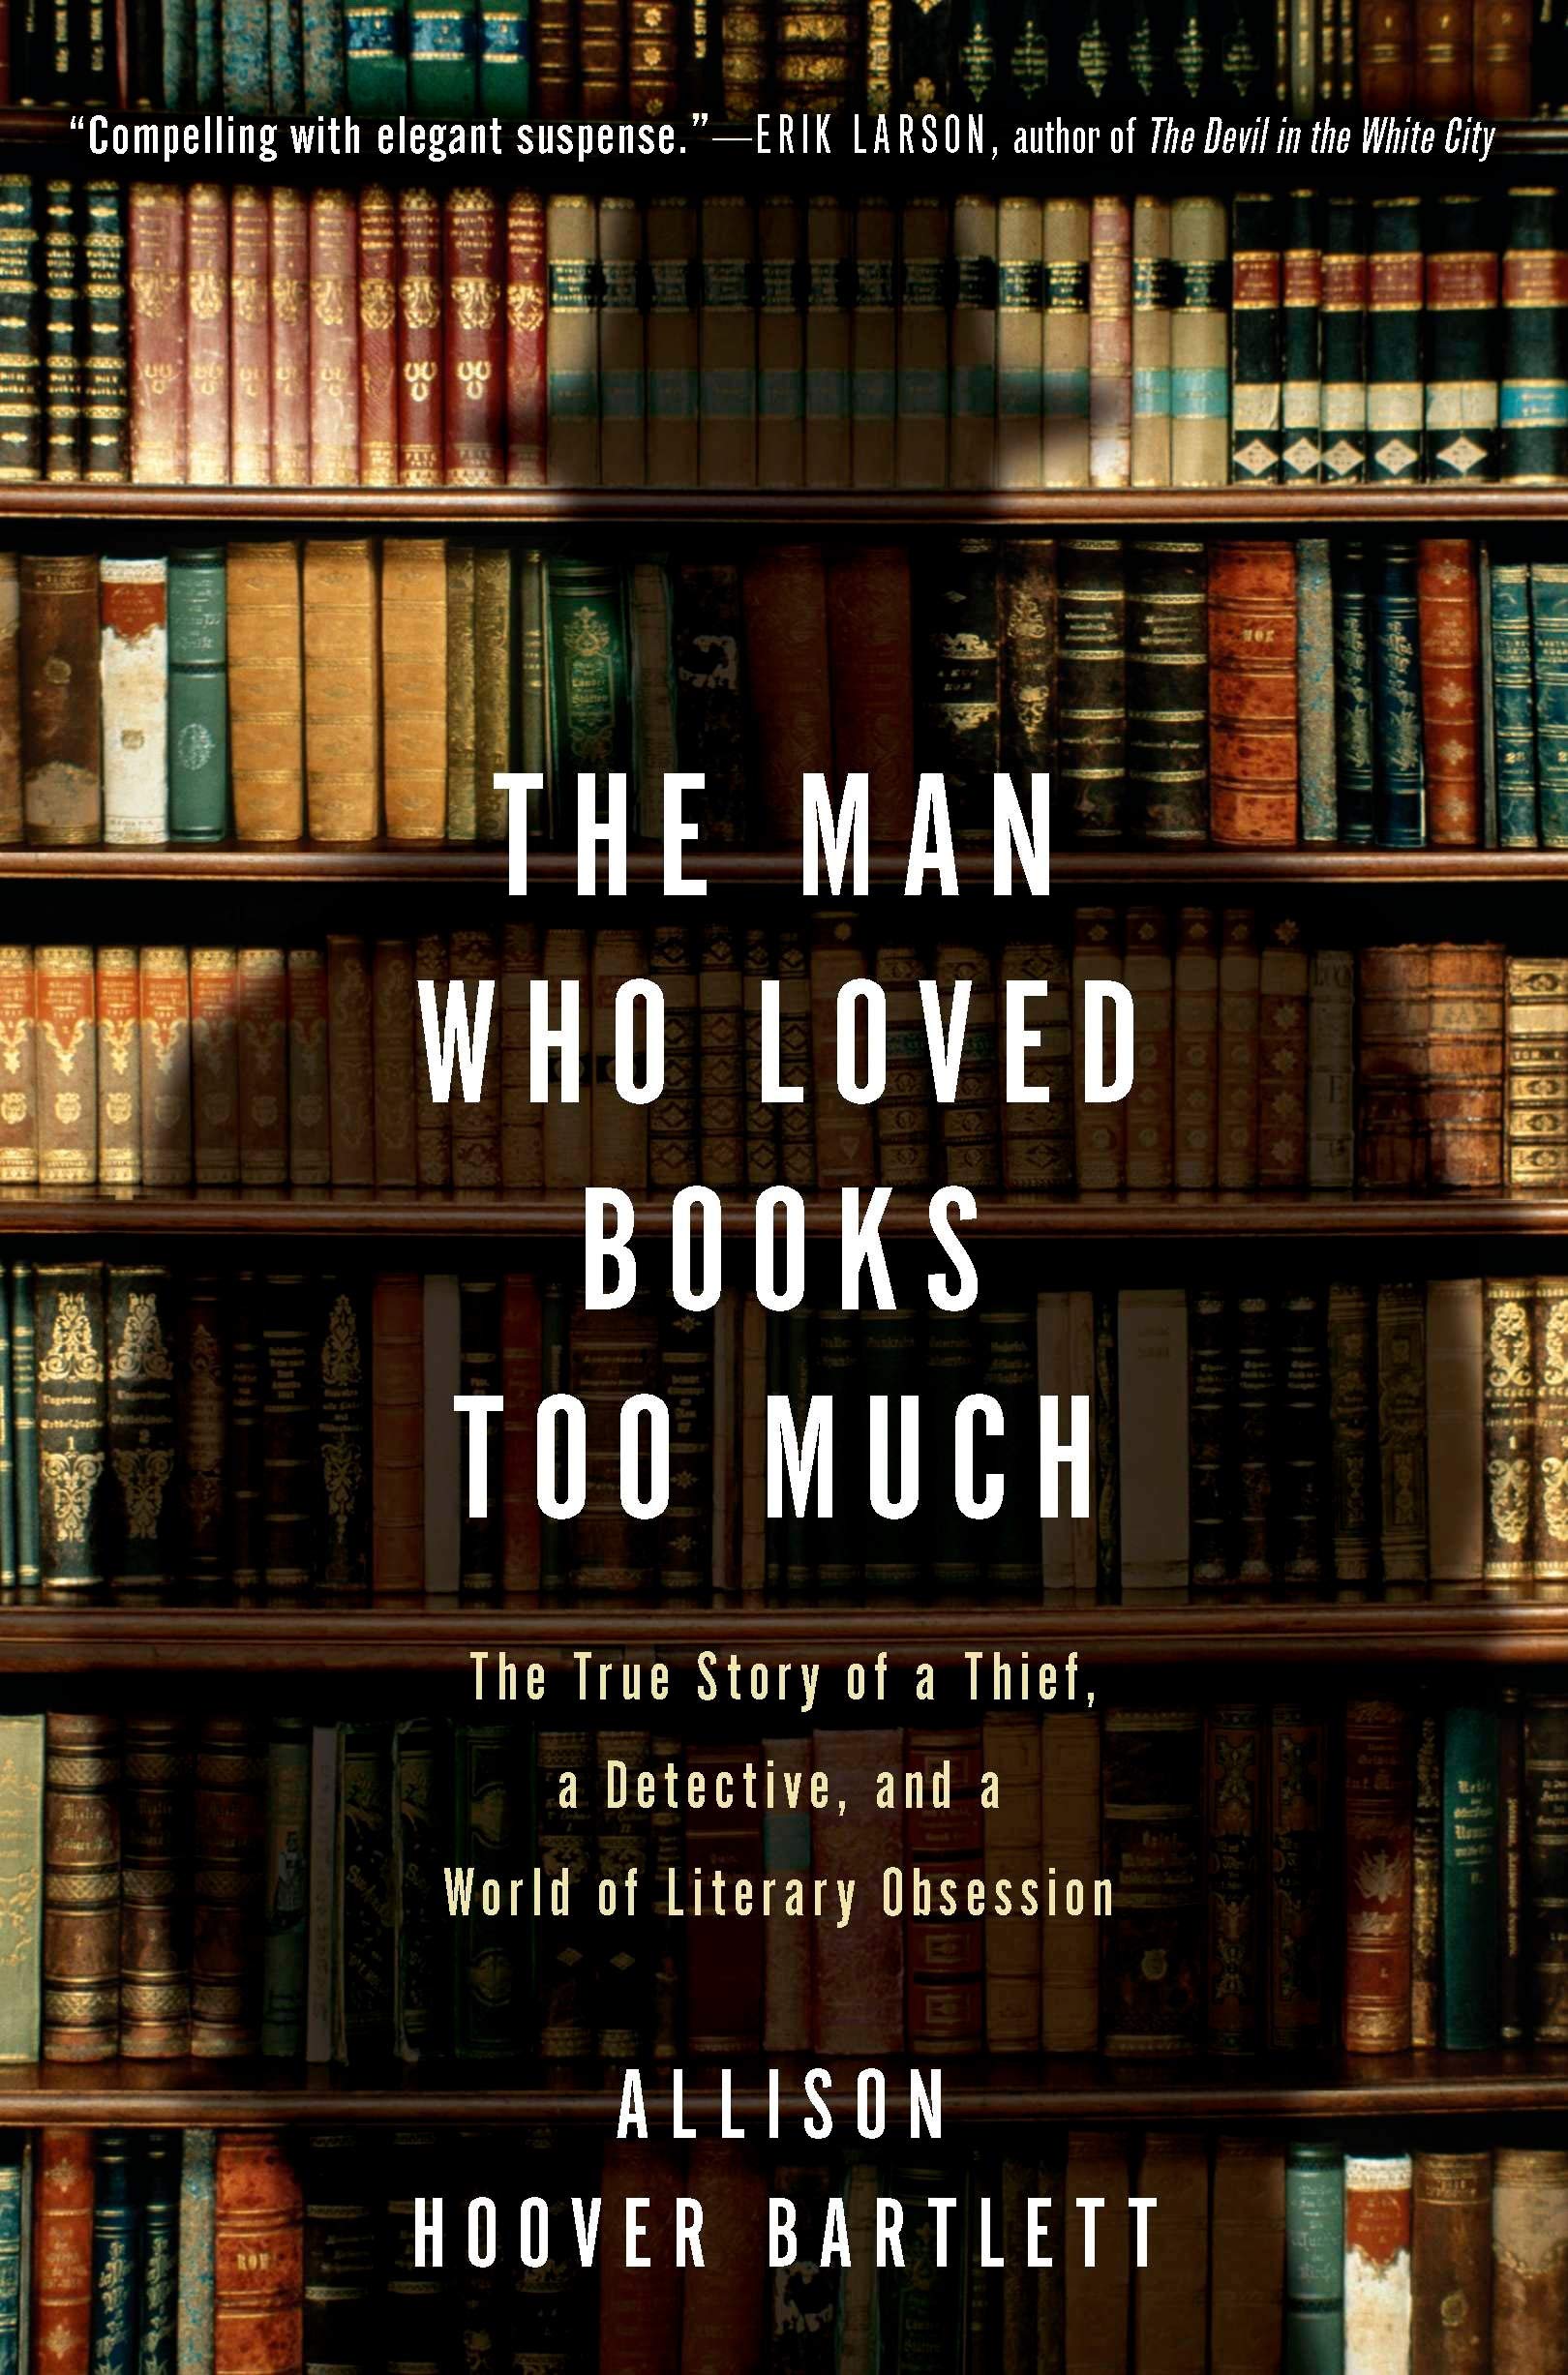 Cover Image, "The Man Who Loved Books Too Much"